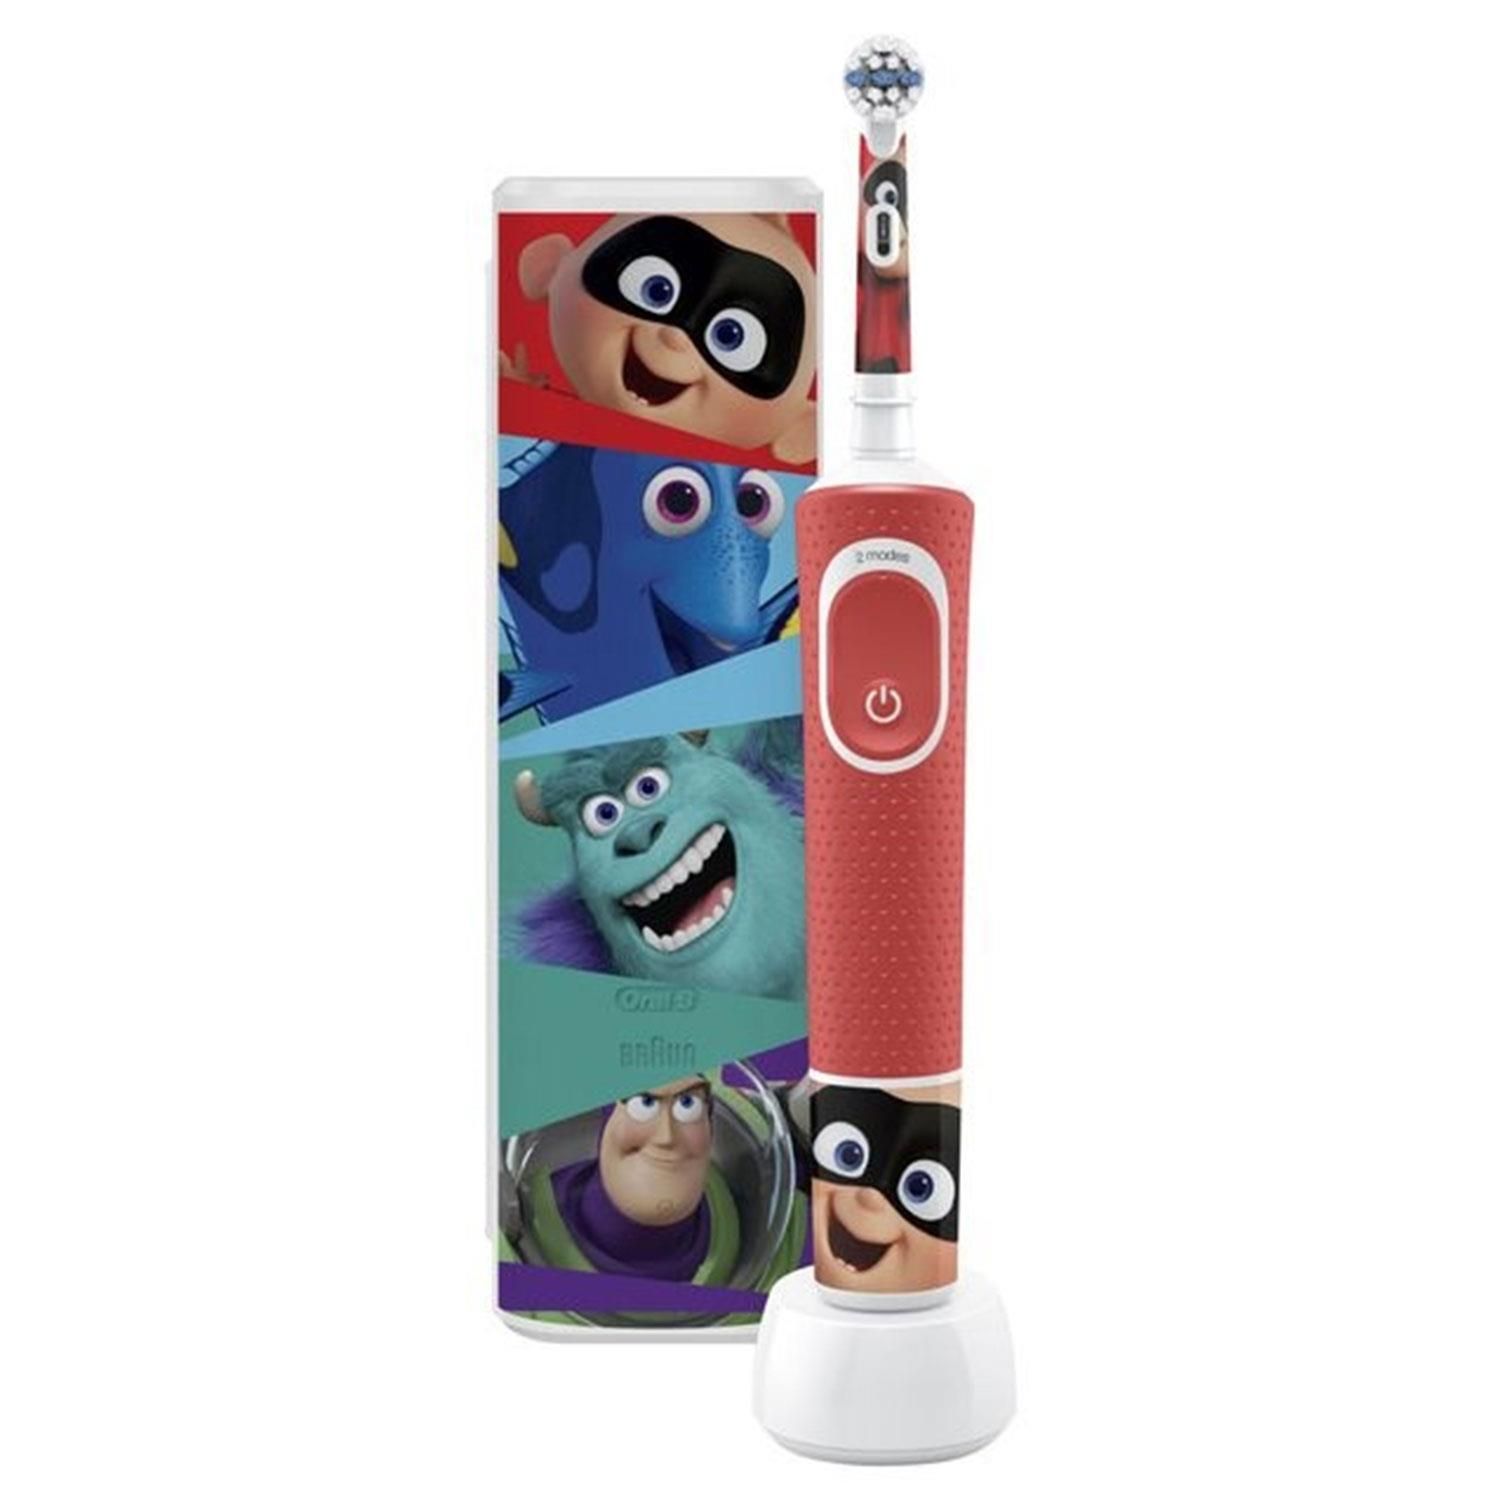 Oral-B Kids 3+ Pixar Electric Toothbrush Giftset with Travel Case.  The Oral-B Kids electric toothbrush for ages 3+ entertains children with Disney Pixar characters stickers while offering gentle and effective cleaning with a toothbrush recommended by Oral-B dentists. With a unique function for brushing sensitive children's teeth, this toothbrush gently cleanses children's teeth. Removes more plaque than a simple manual toothbrush. Includes four stickers from Disney Pixar characters to decorate the handle.

Features: 
 
   Specially designed to be soft with baby teeth
   Round toothbrush head with an ideal size for small mouths Extremely soft fibres that are soft on the gums
   Suitable for ages 3+
   Decorate the brush handle with 4 stickers from Disney Pixar characters
   Works with Oral-B Disney Magic Timer app
   Rechargeable battery for charging that lasts 8 days
   Encourages brushing for 2 minutes with the built-in timer

The Box contains: 1x electric toothbrush, 4x sticker for the body of the brush, 1x replacement stages powerhead, 1x travel case with a motif, 1x charging station